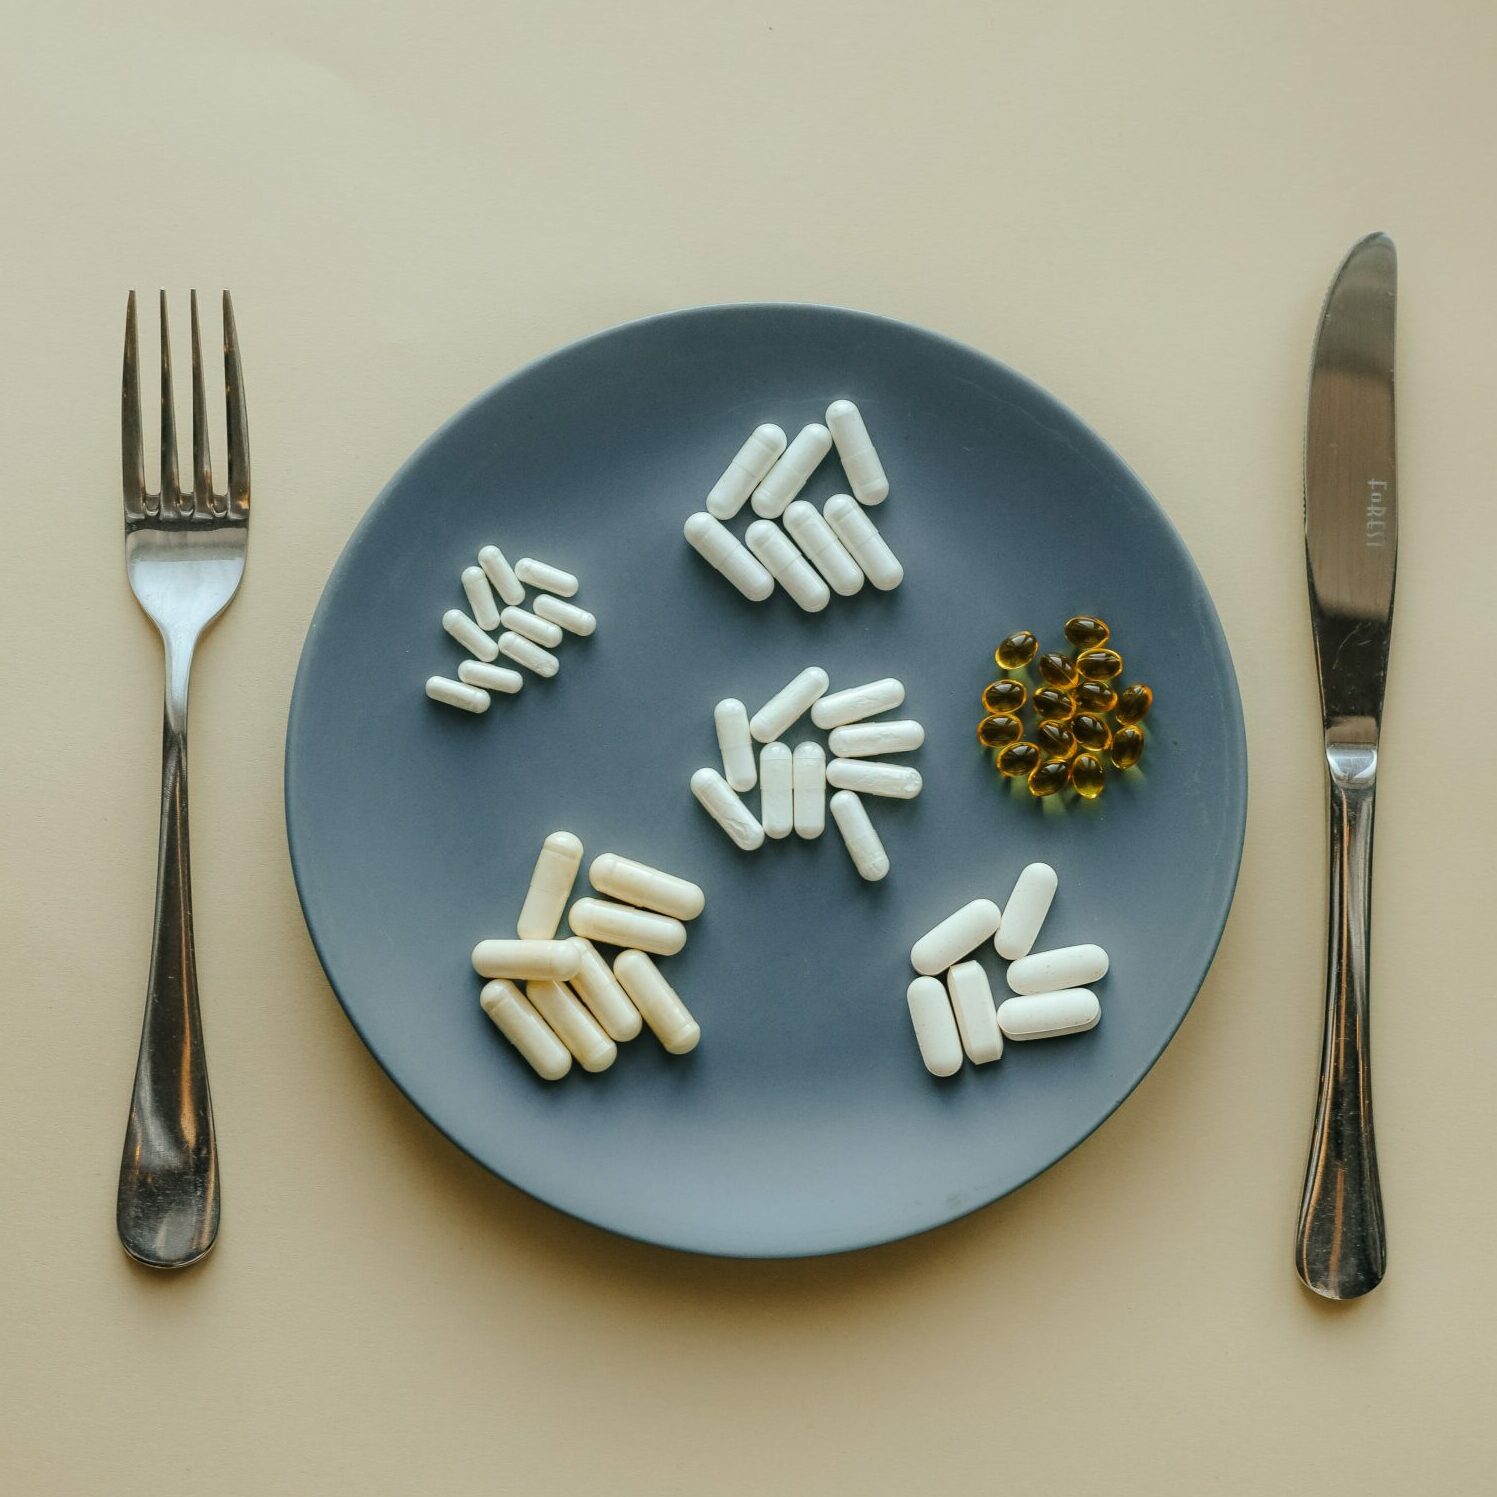 Pic of a plate with supplement pills display in it.